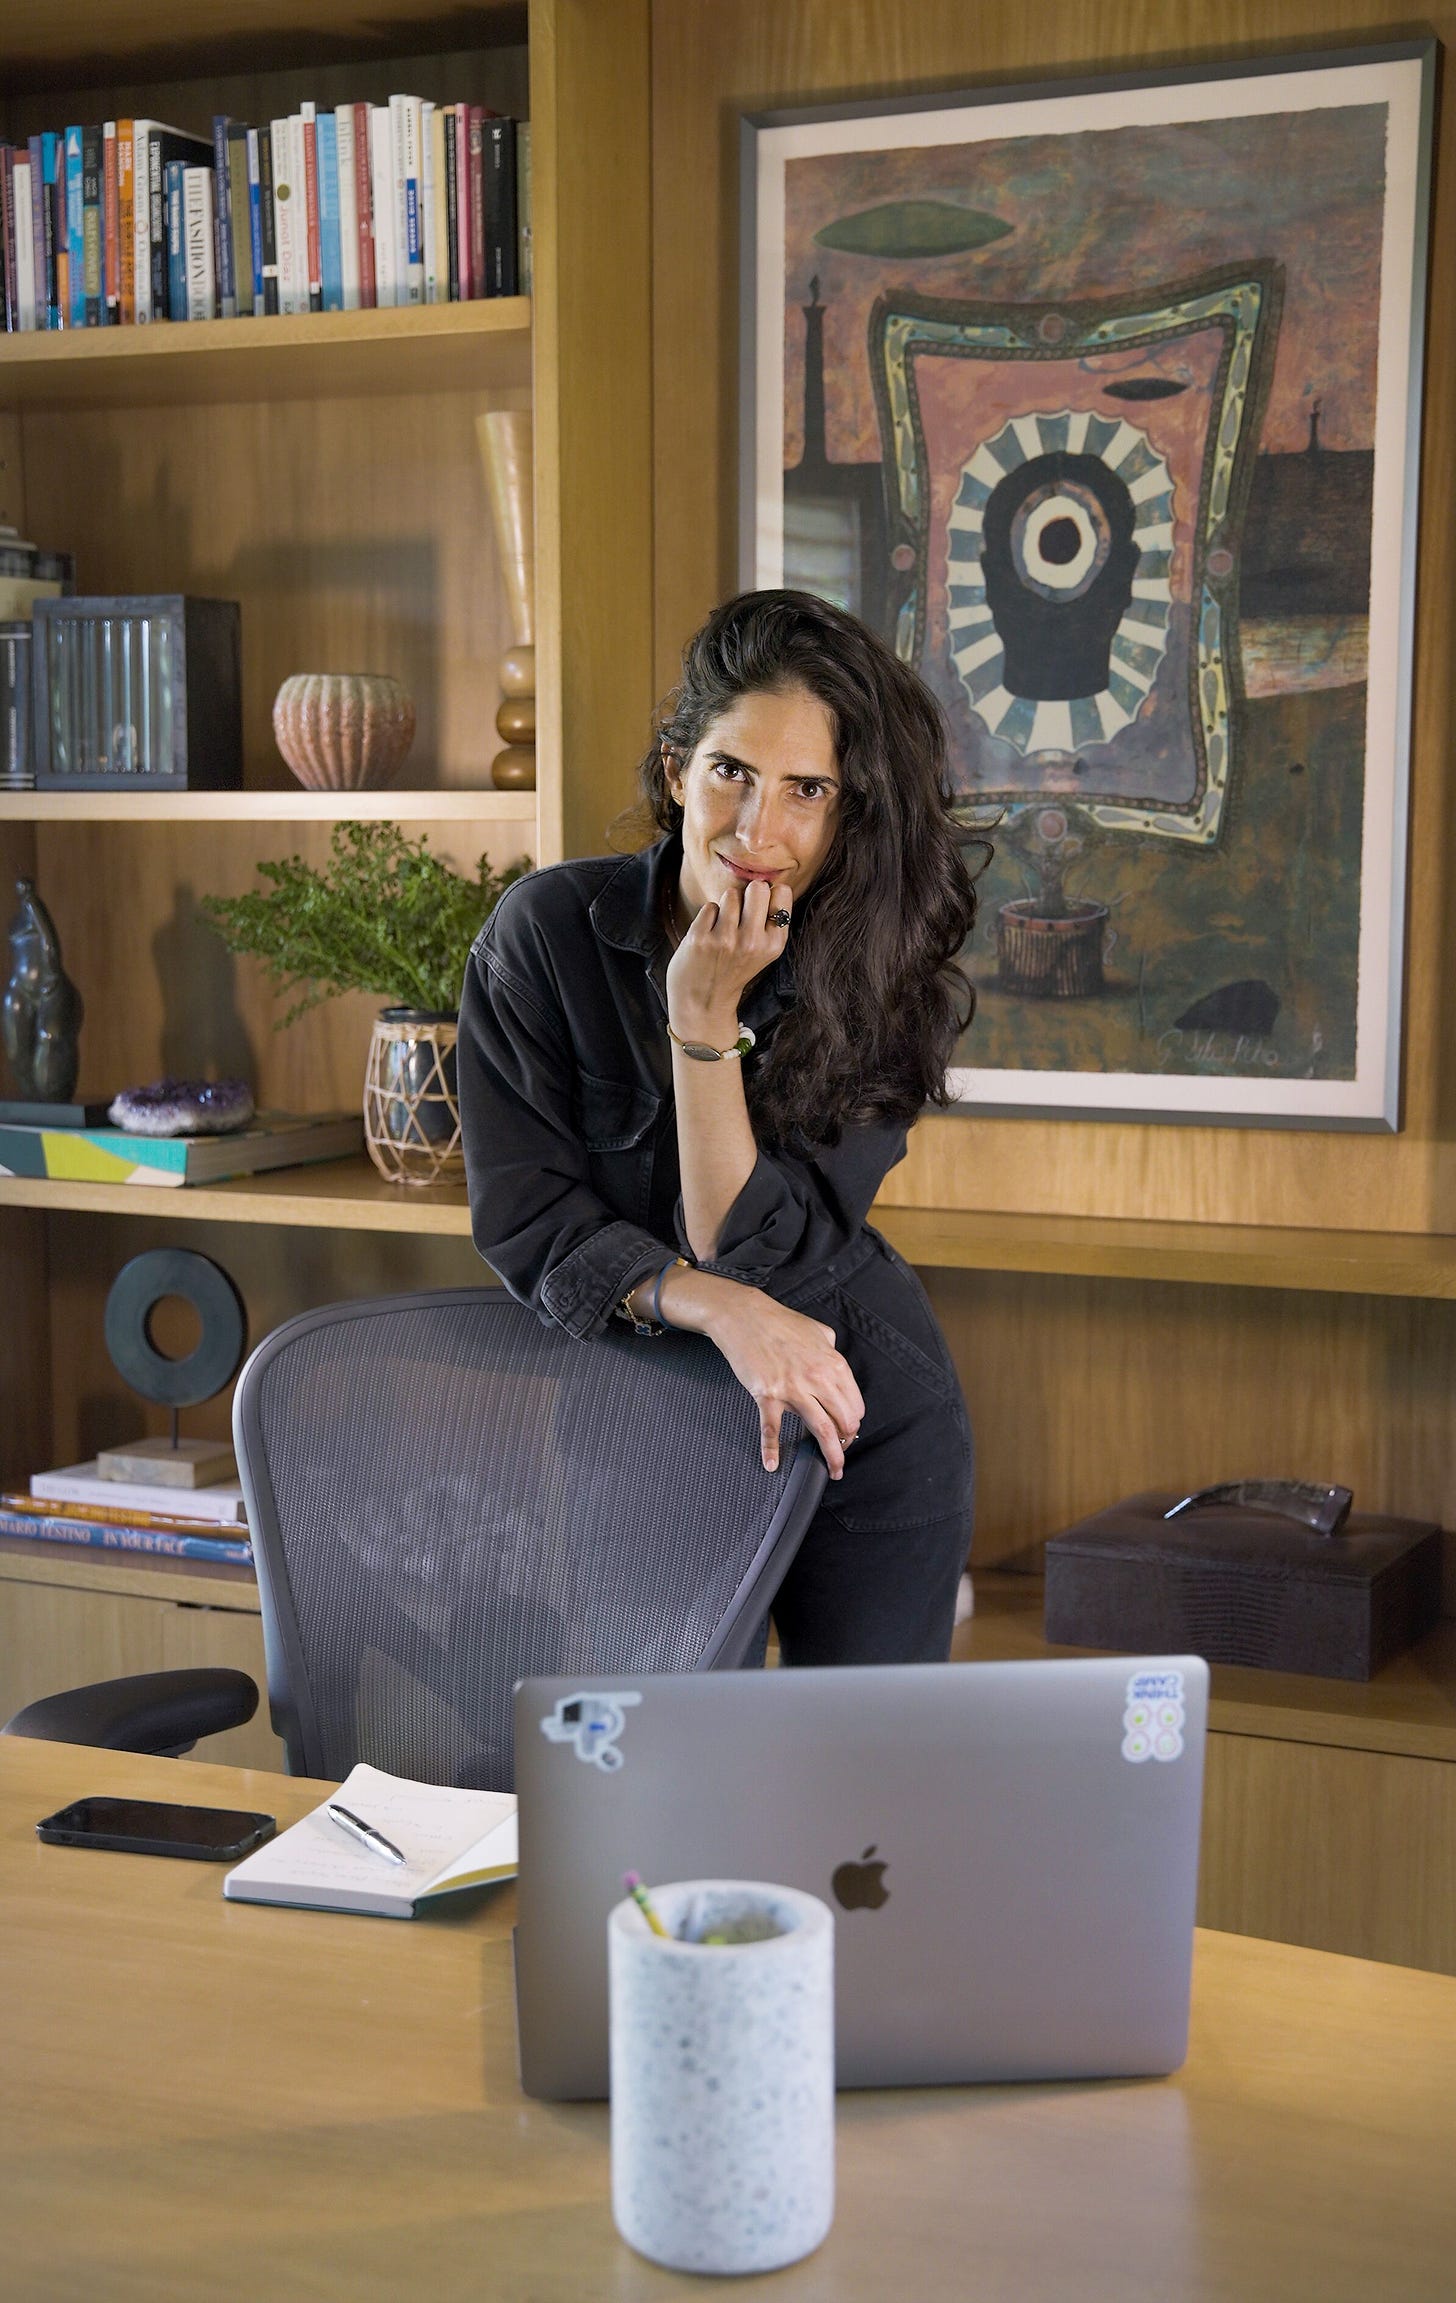 Sari is standing in an office, leaning over a grey Herman Miller office chair with her right hand resting on the left corner. She’s wearing a black shirt and black jeans, and her long black, wavy hair is draped round her left shoulder. Behind Sari is a large portrait abstract painting, to the right of which is a wooden bookshelf featuring a range of books, ceramics, and sculptures, all carefully placed.